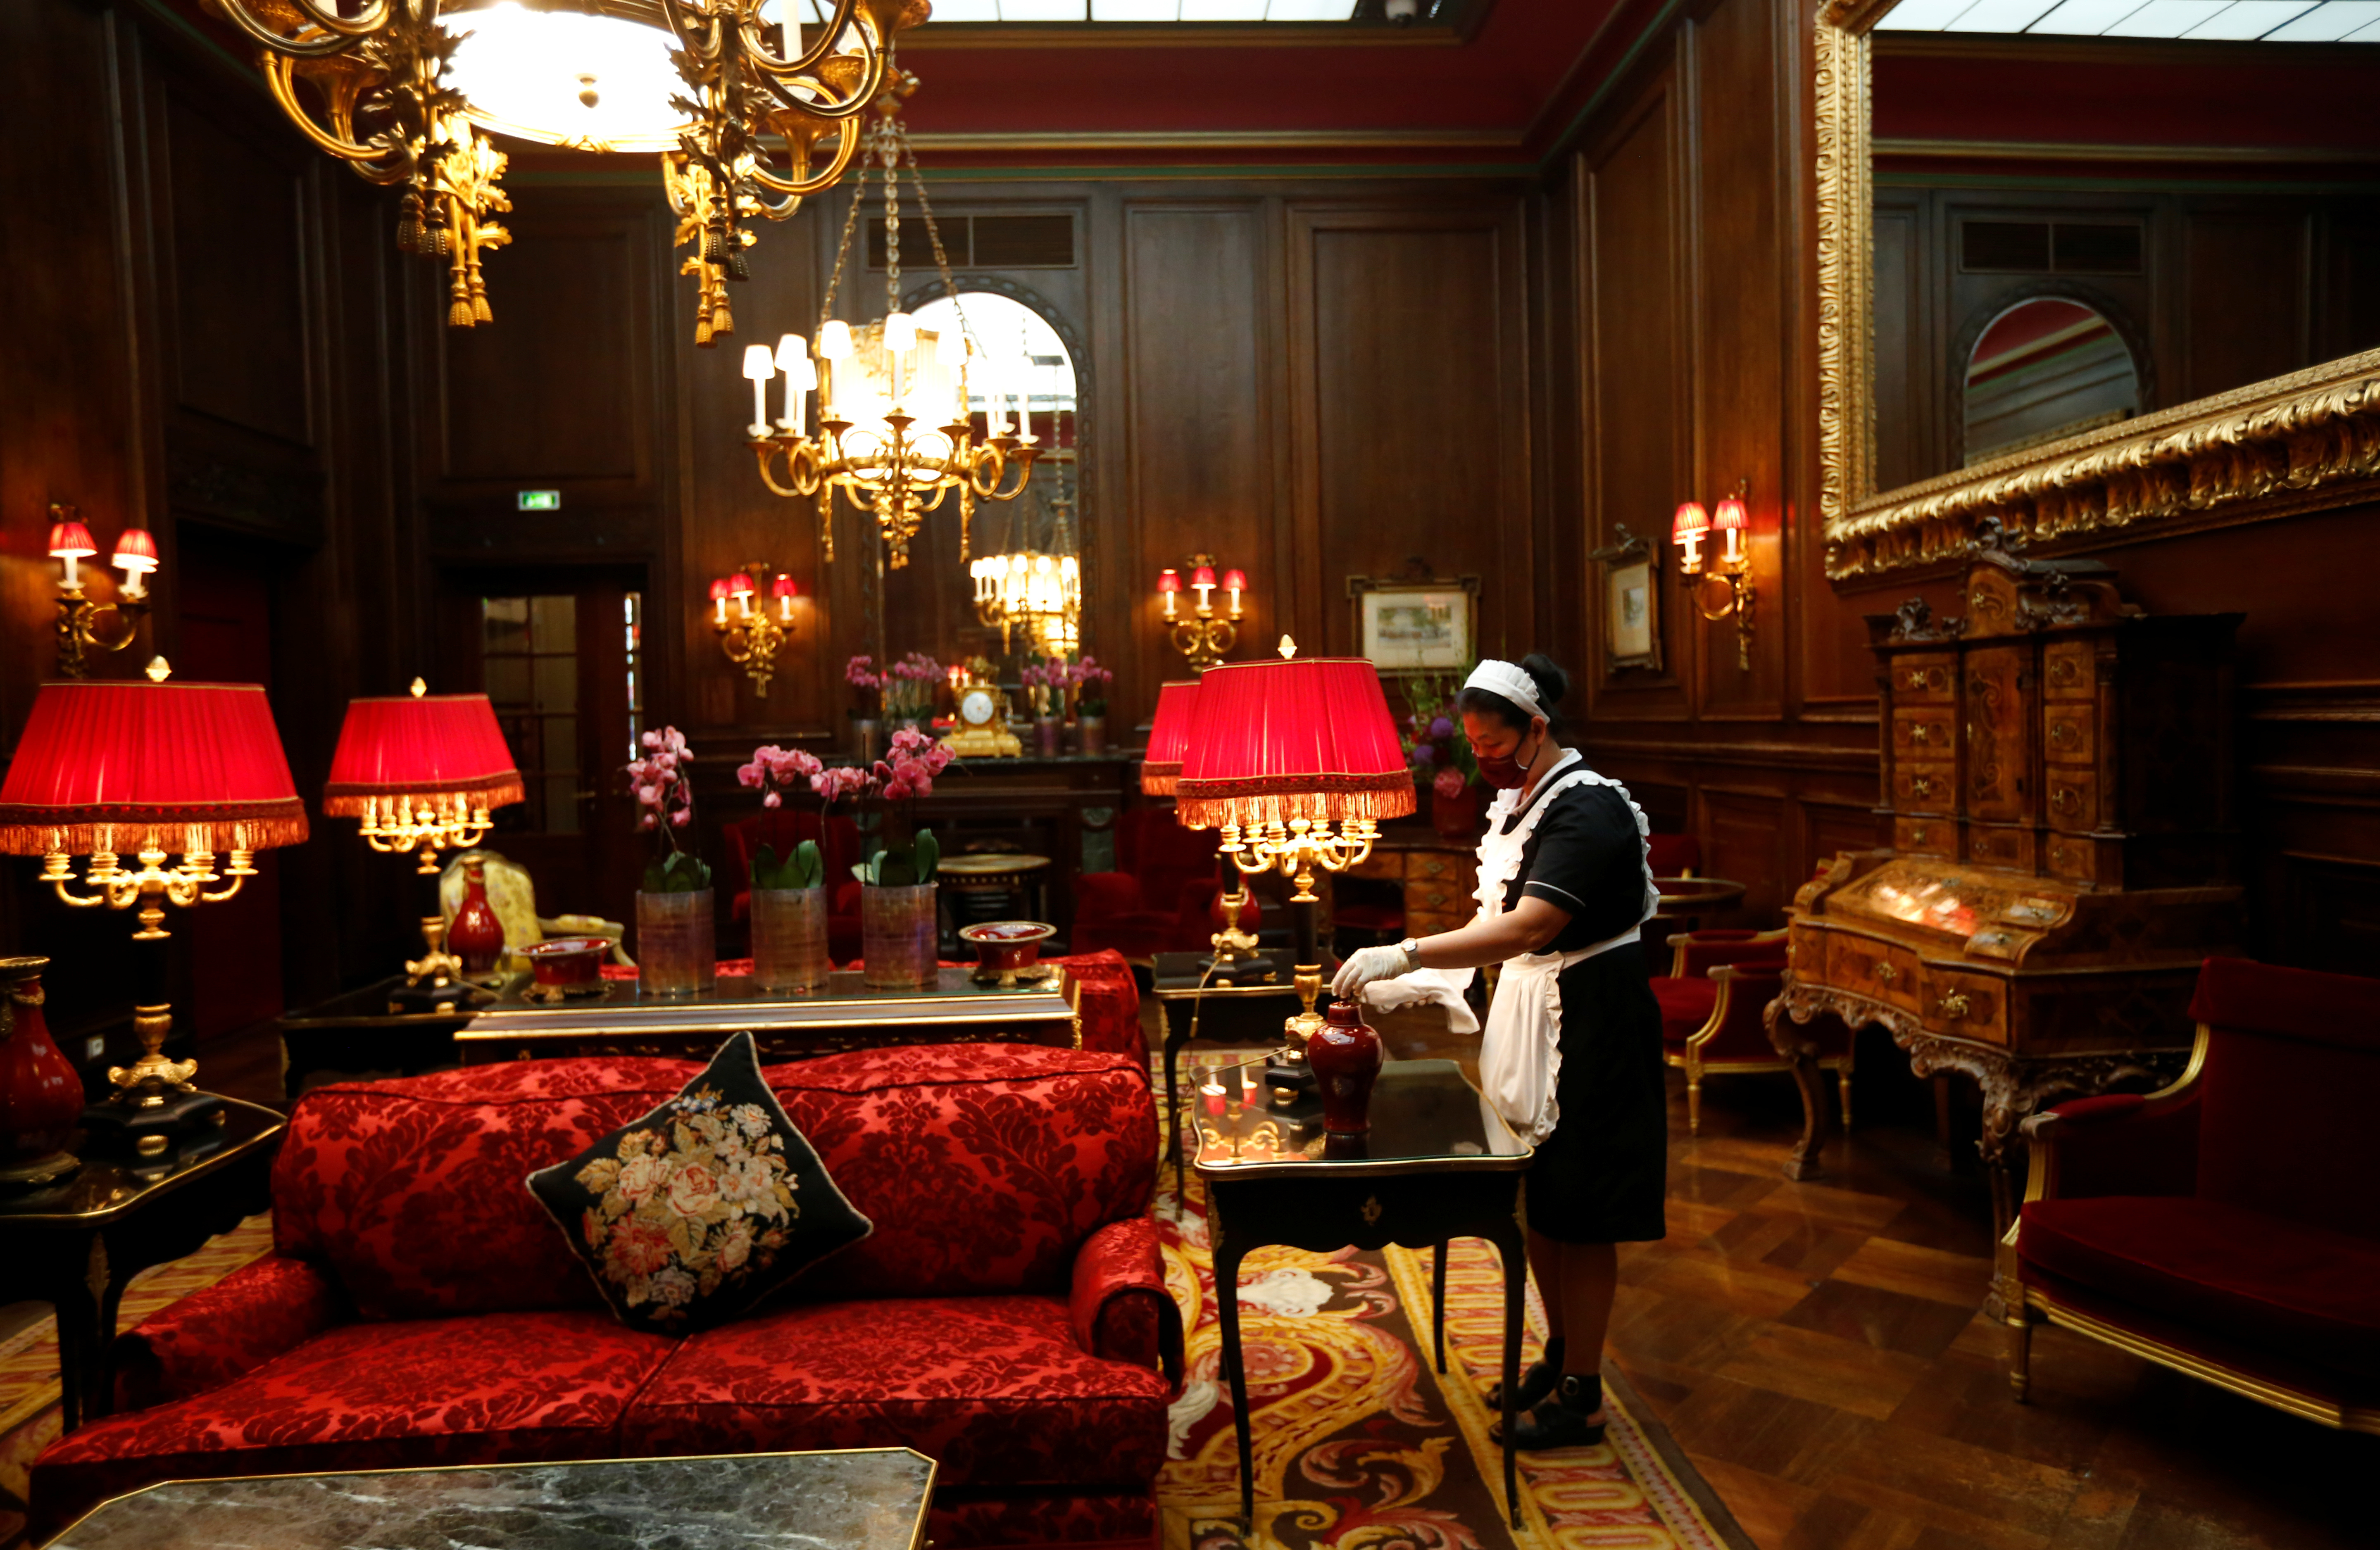 Vienna's legendary five star Sacher hotel prepares for reopening